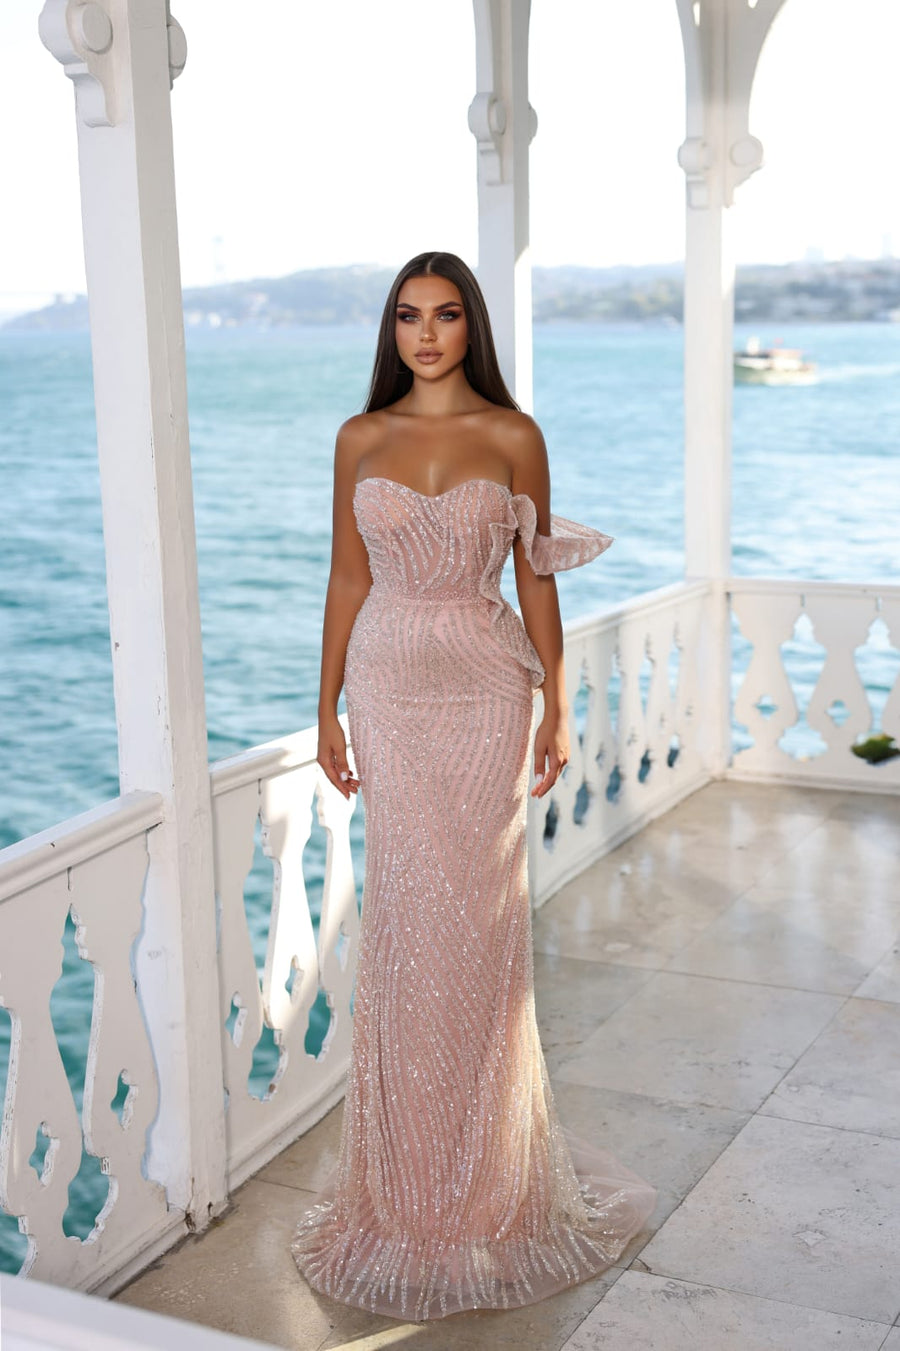 MODESSA BEADED GOWN WITH SHOULDER PEPLUM DETAIL